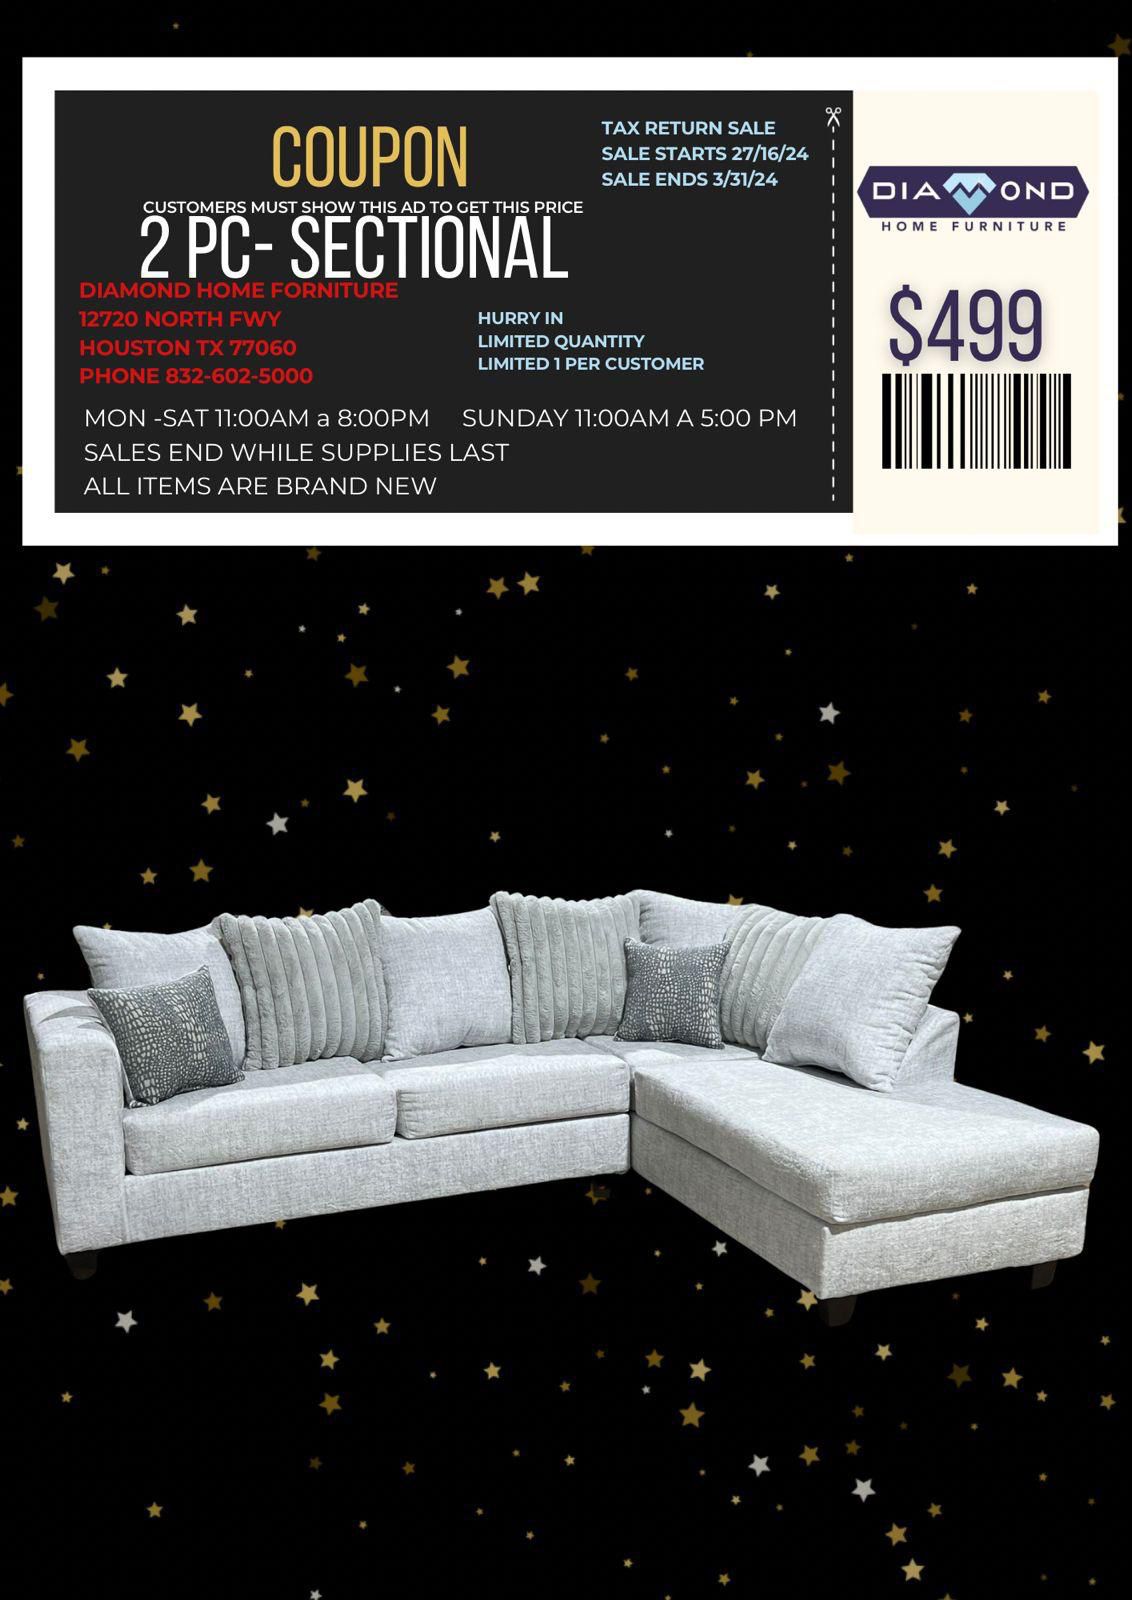 2PC GREY SECTIONAL /$499